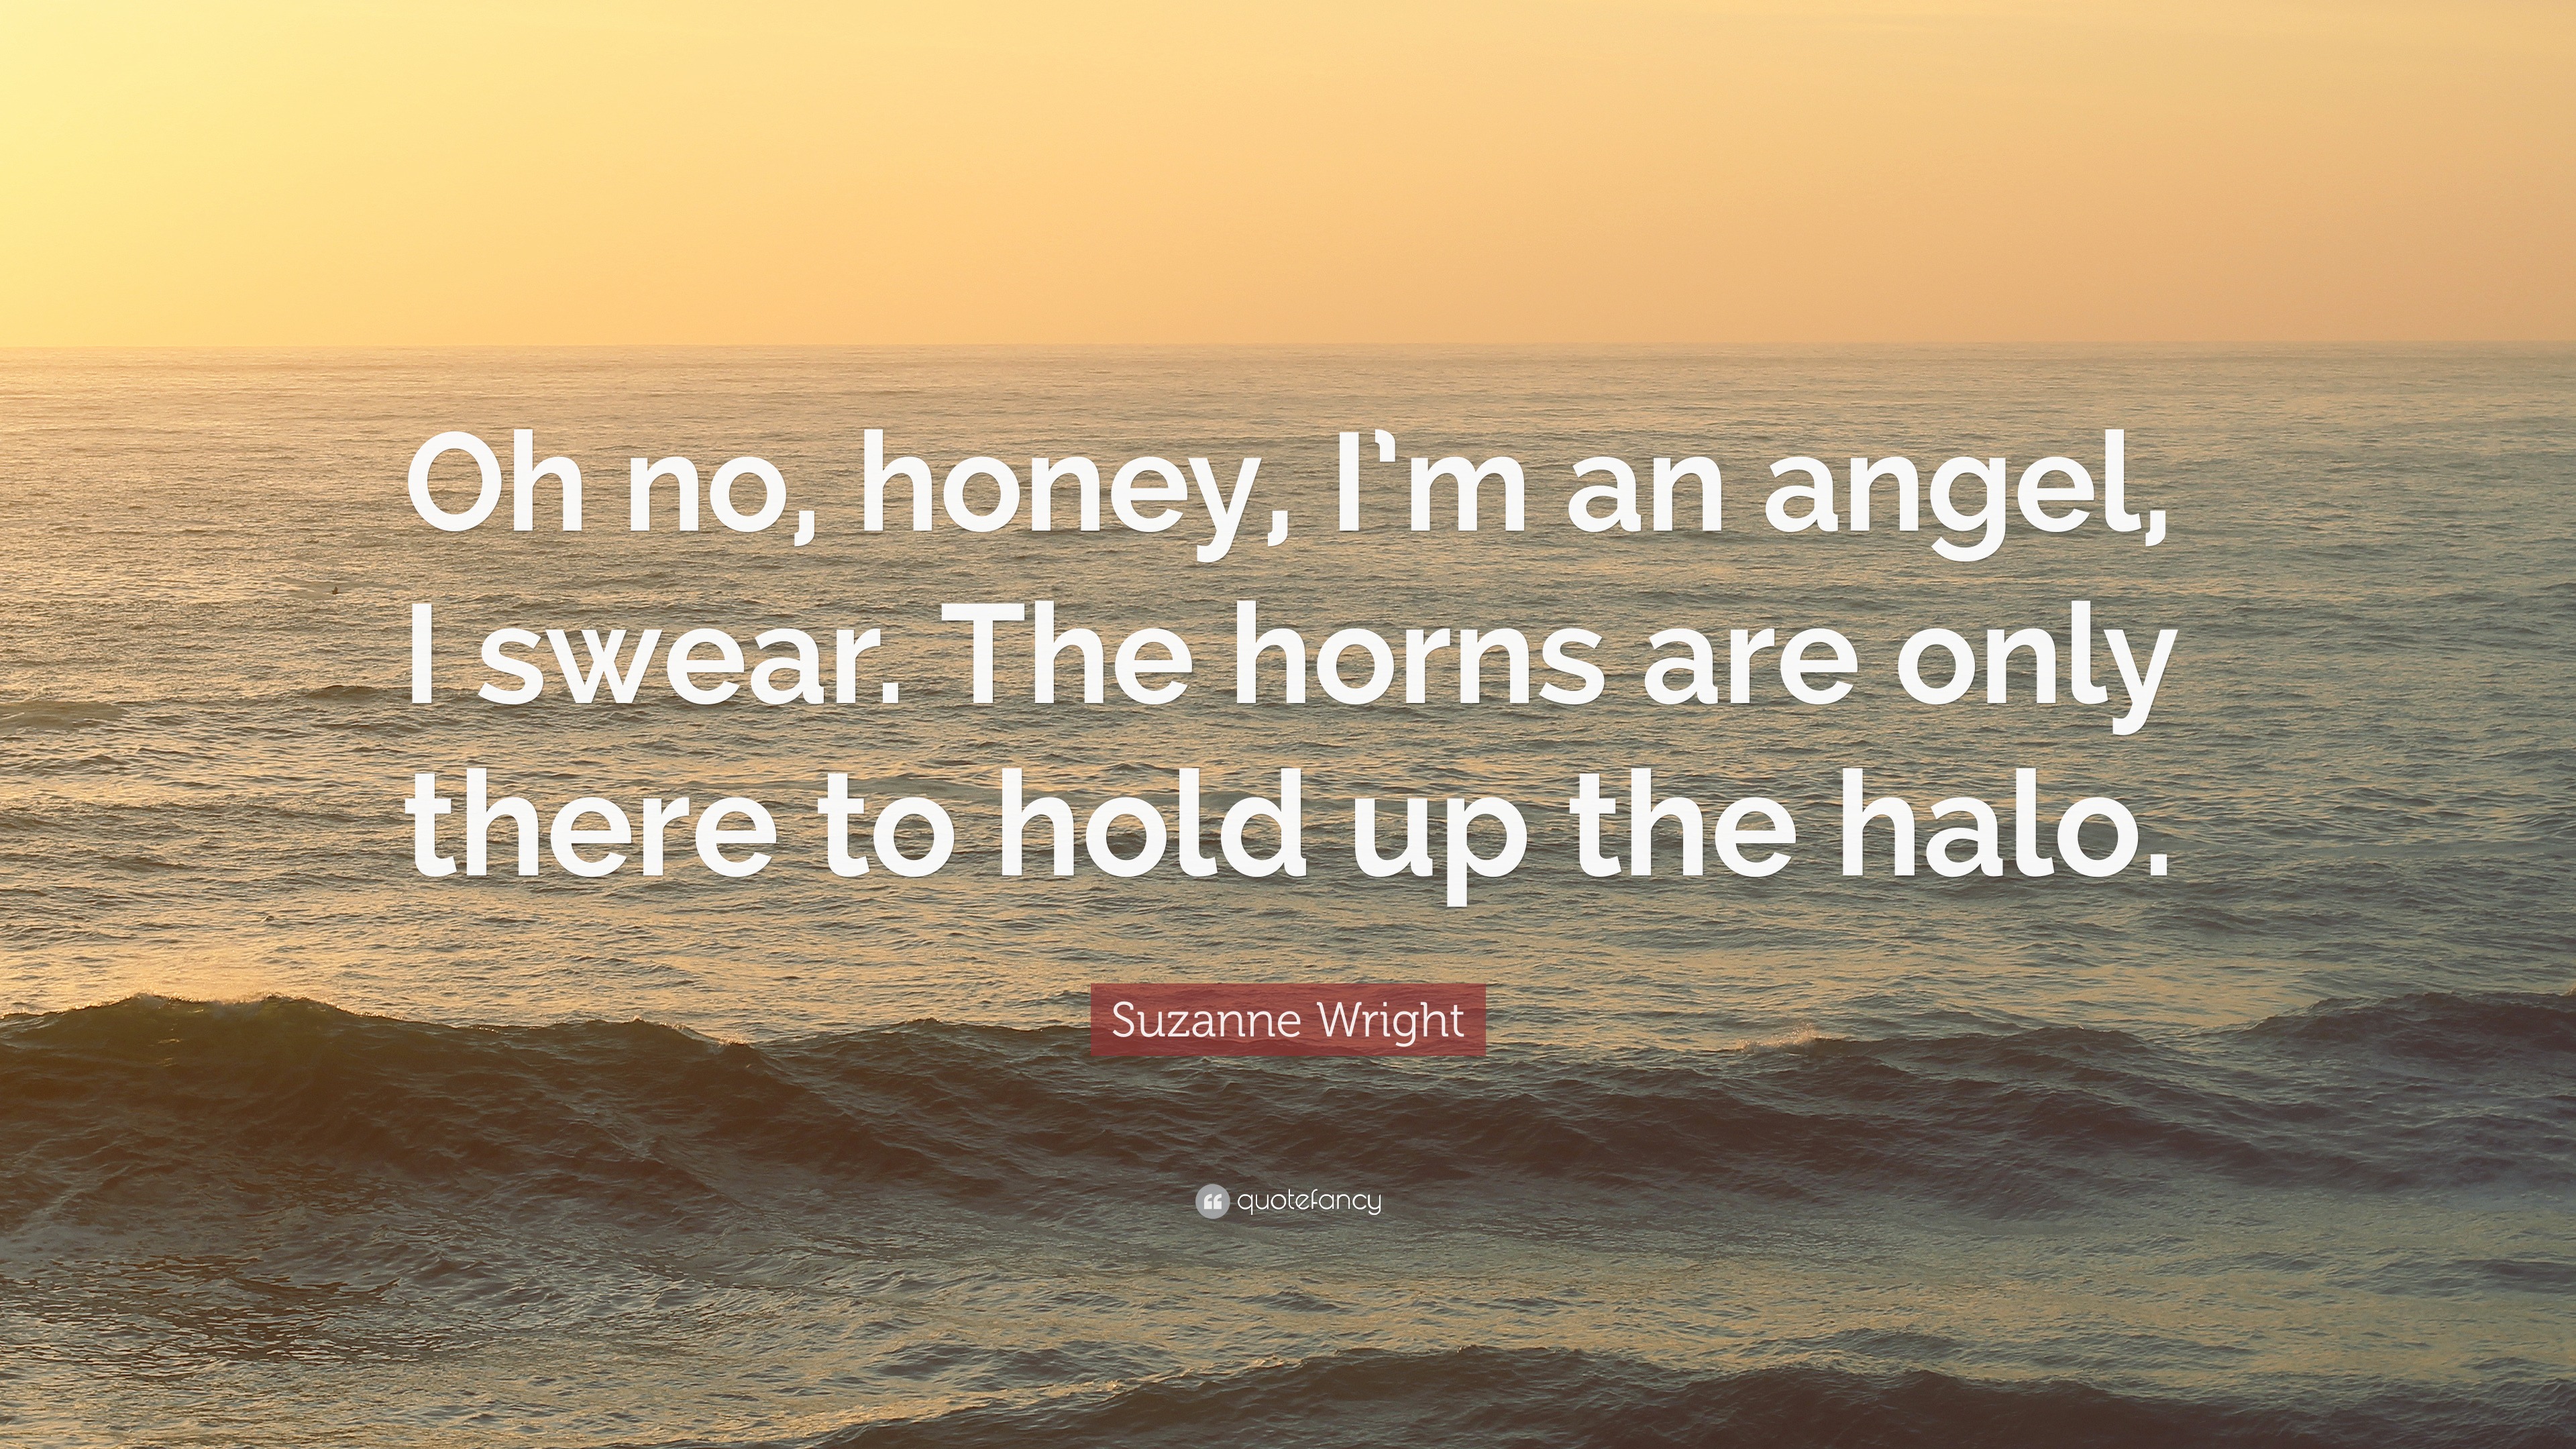 Suzanne Wright Quote: “Oh no, honey, I'm an angel, I swear. The horns are  only